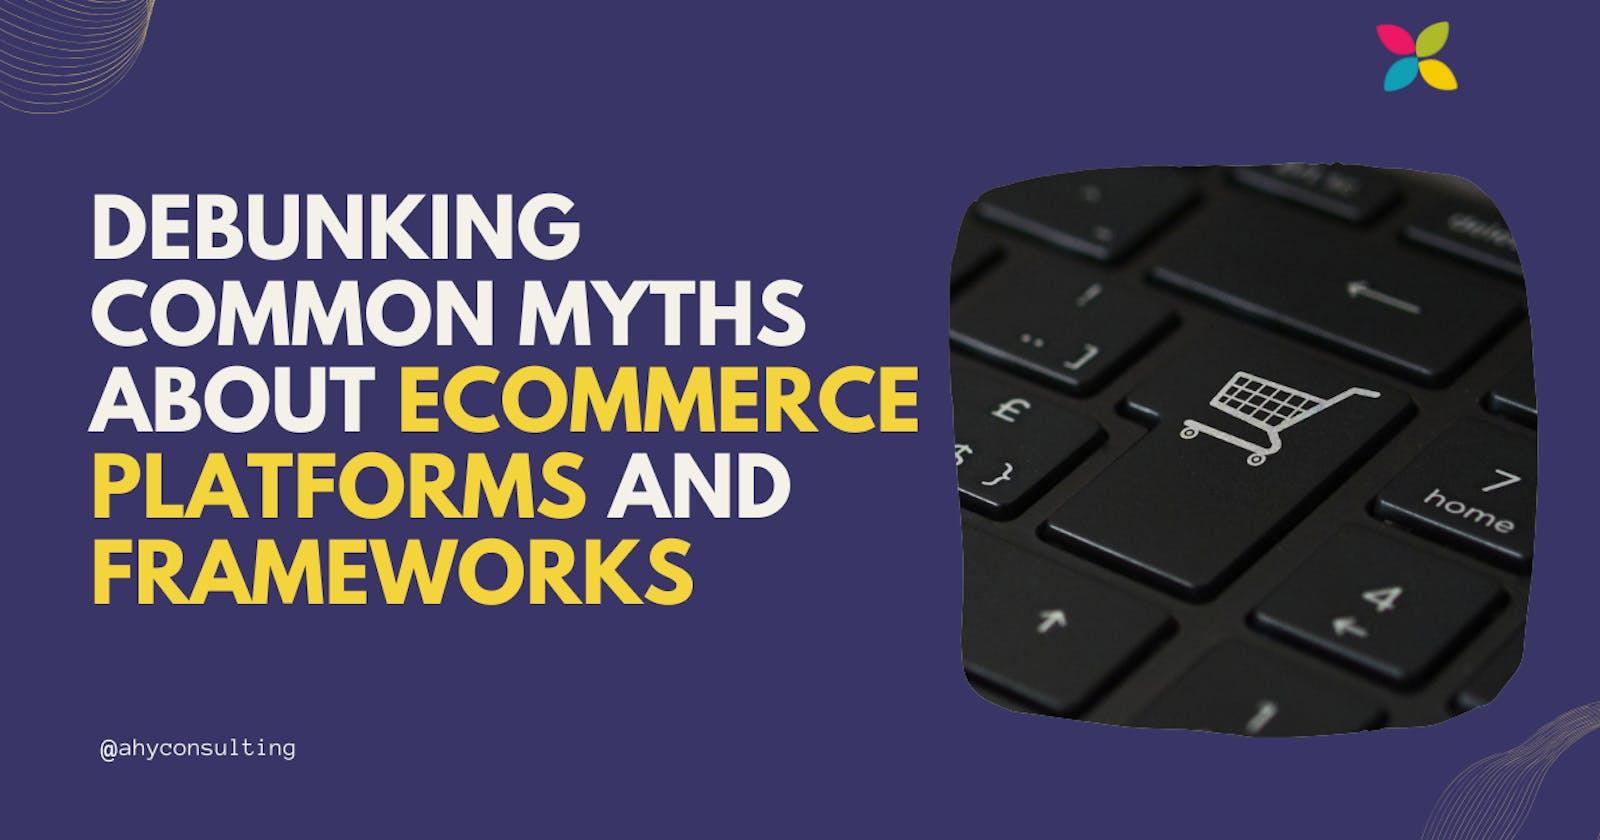 Debunking Common Myths About eCommerce Platforms and Frameworks